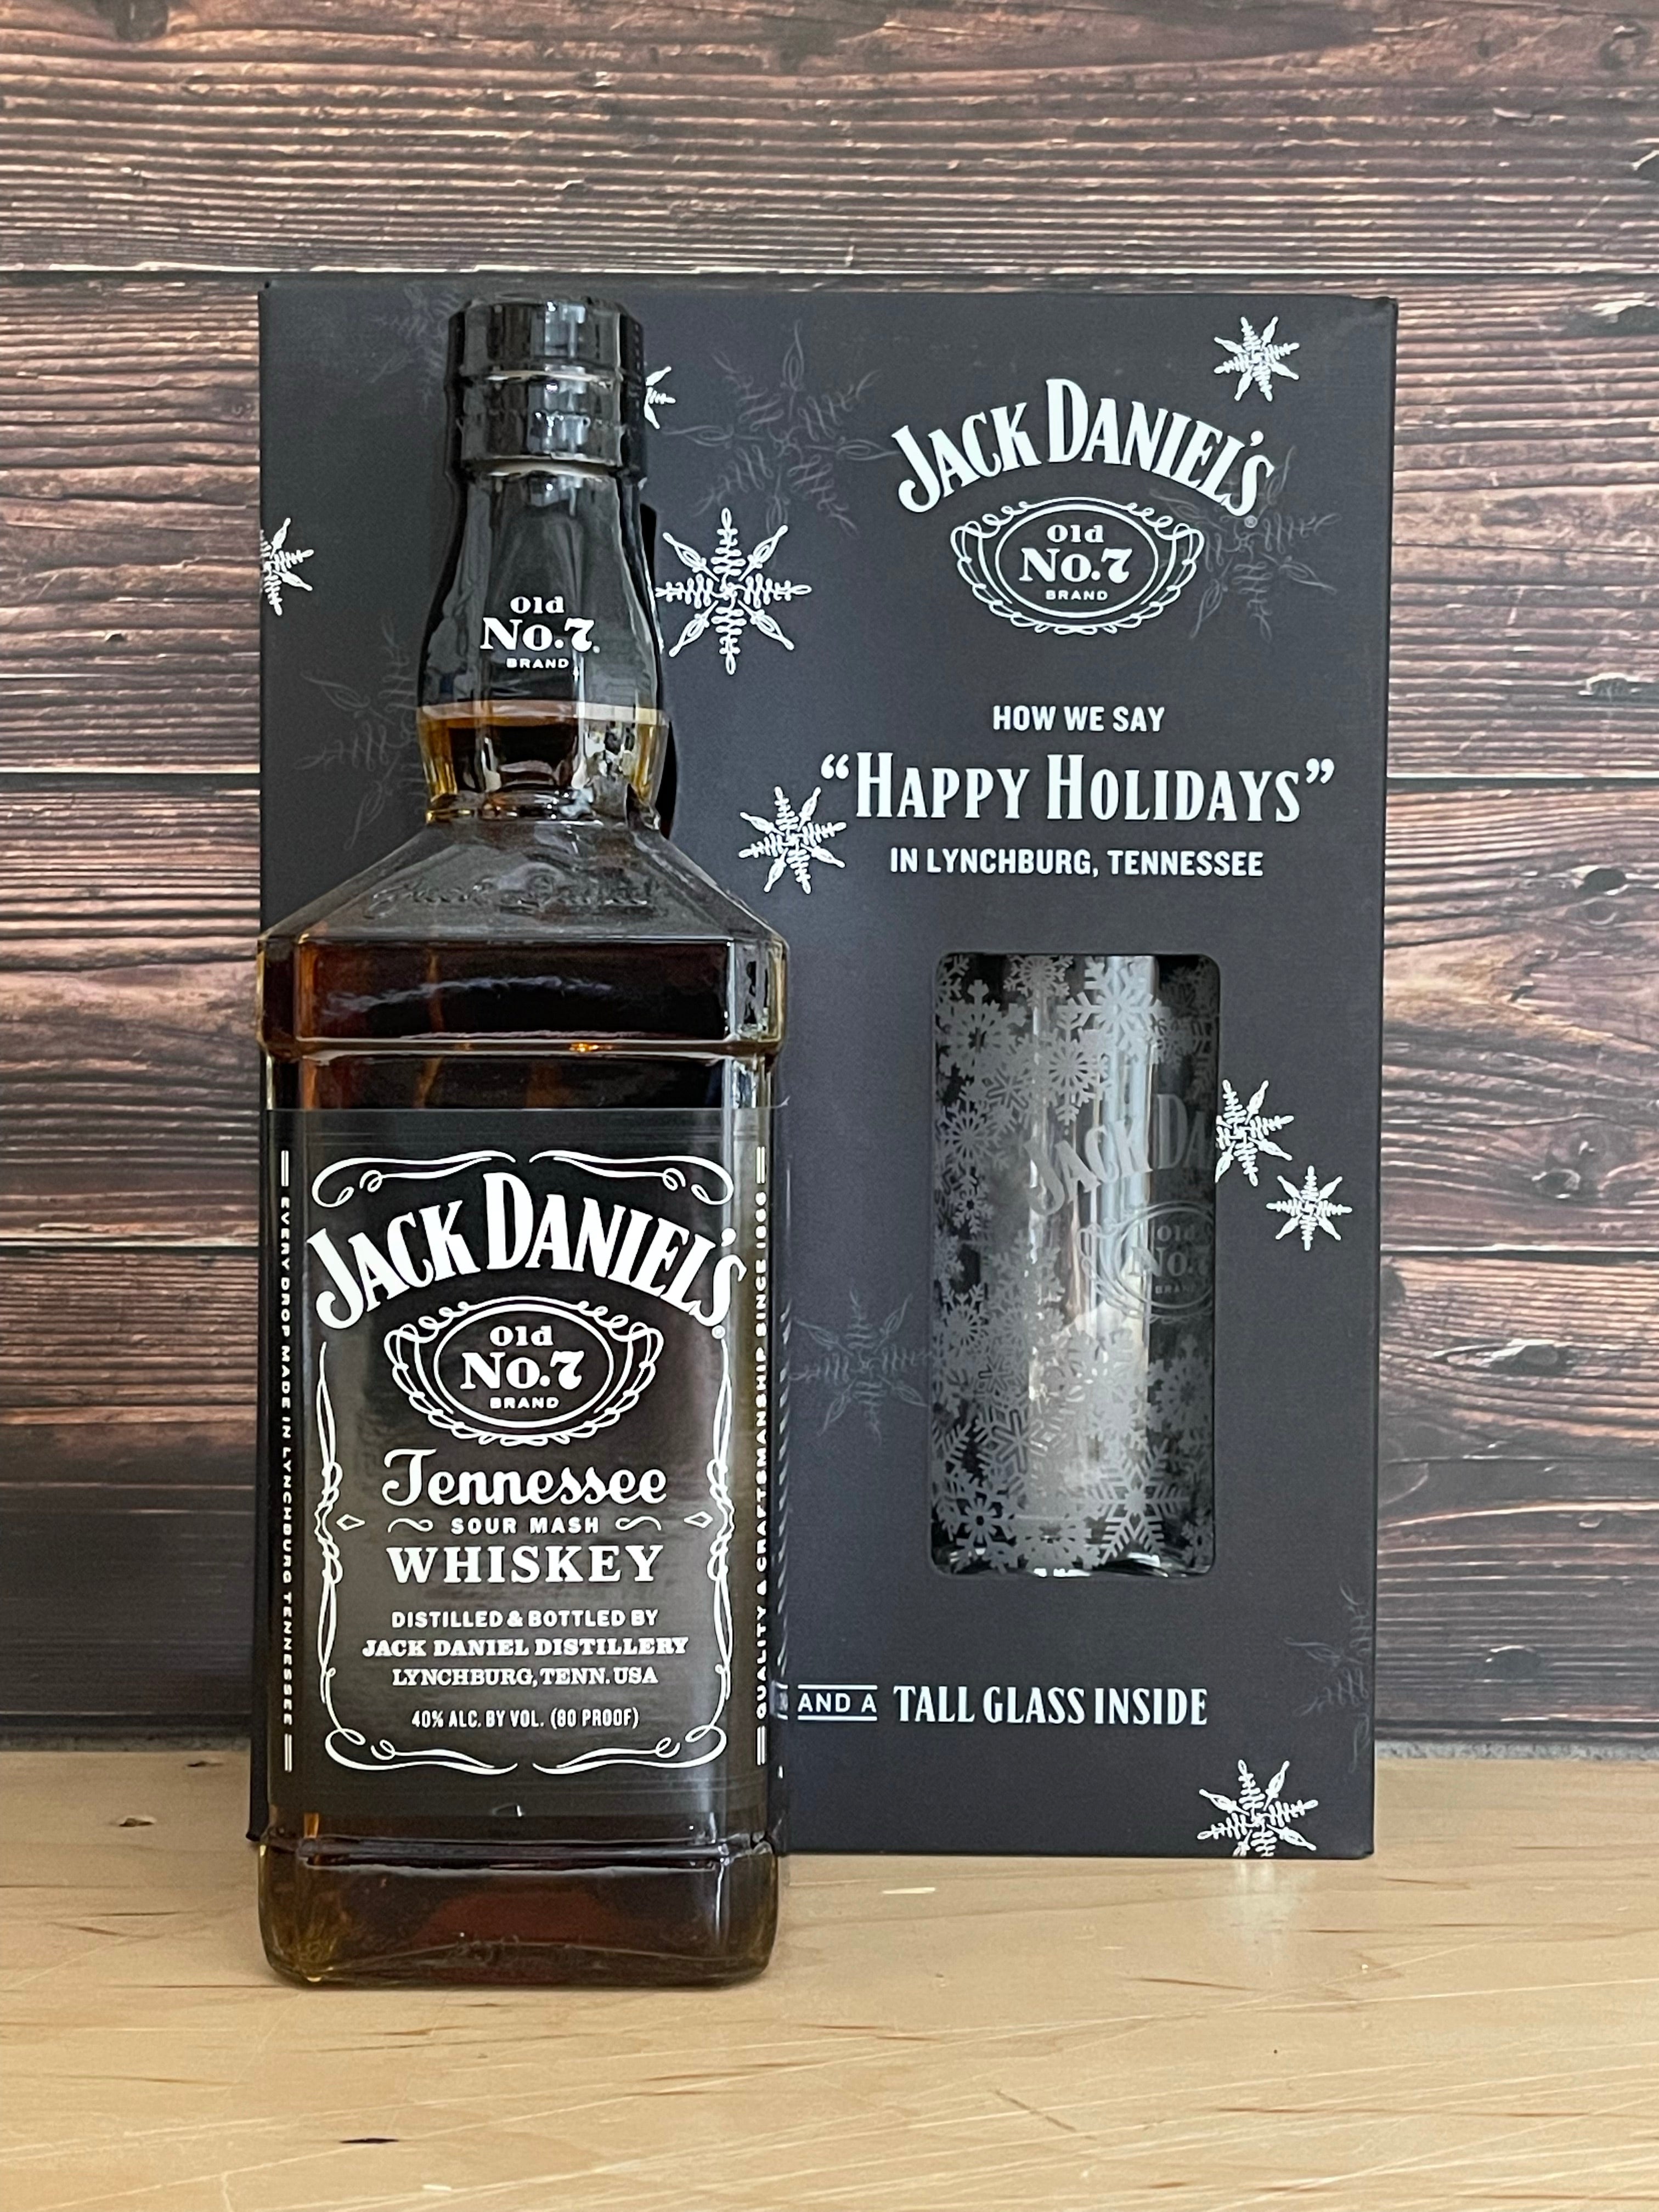 Jack Daniel's whiskey bottle and glass. Jack Daniel's is a brand